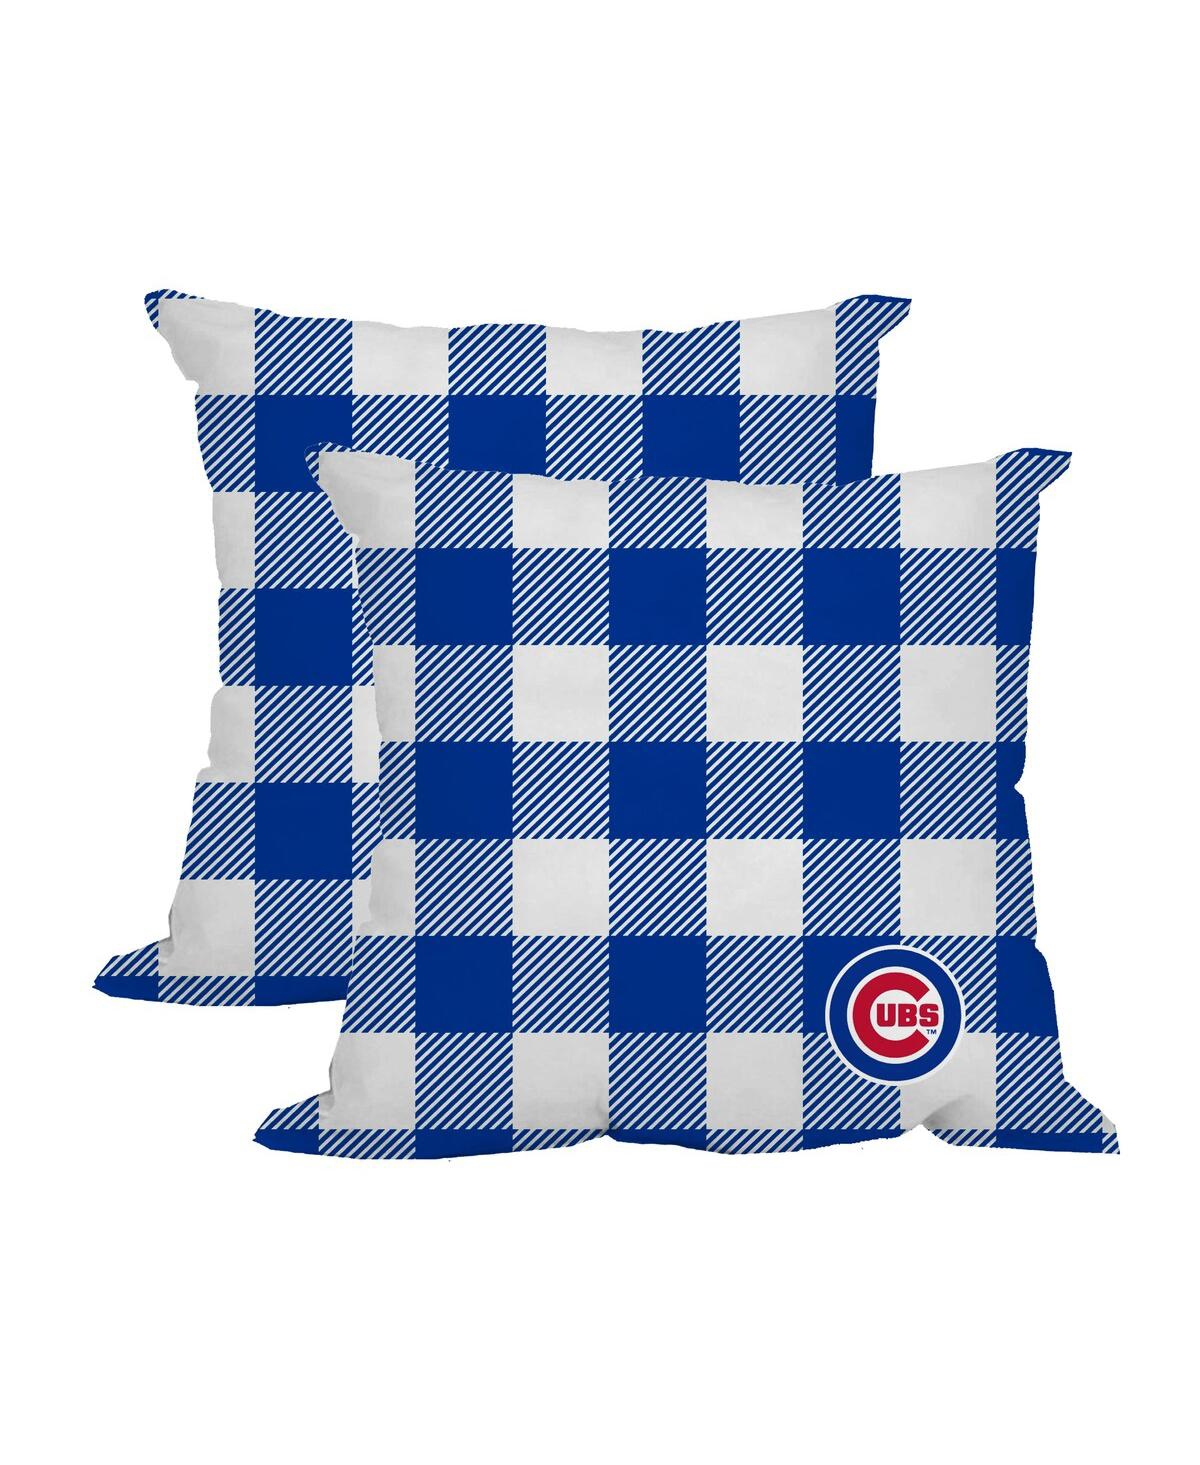 Chicago Cubs 2-Pack Buffalo Check Plaid Outdoor Pillow Set - Blue, White